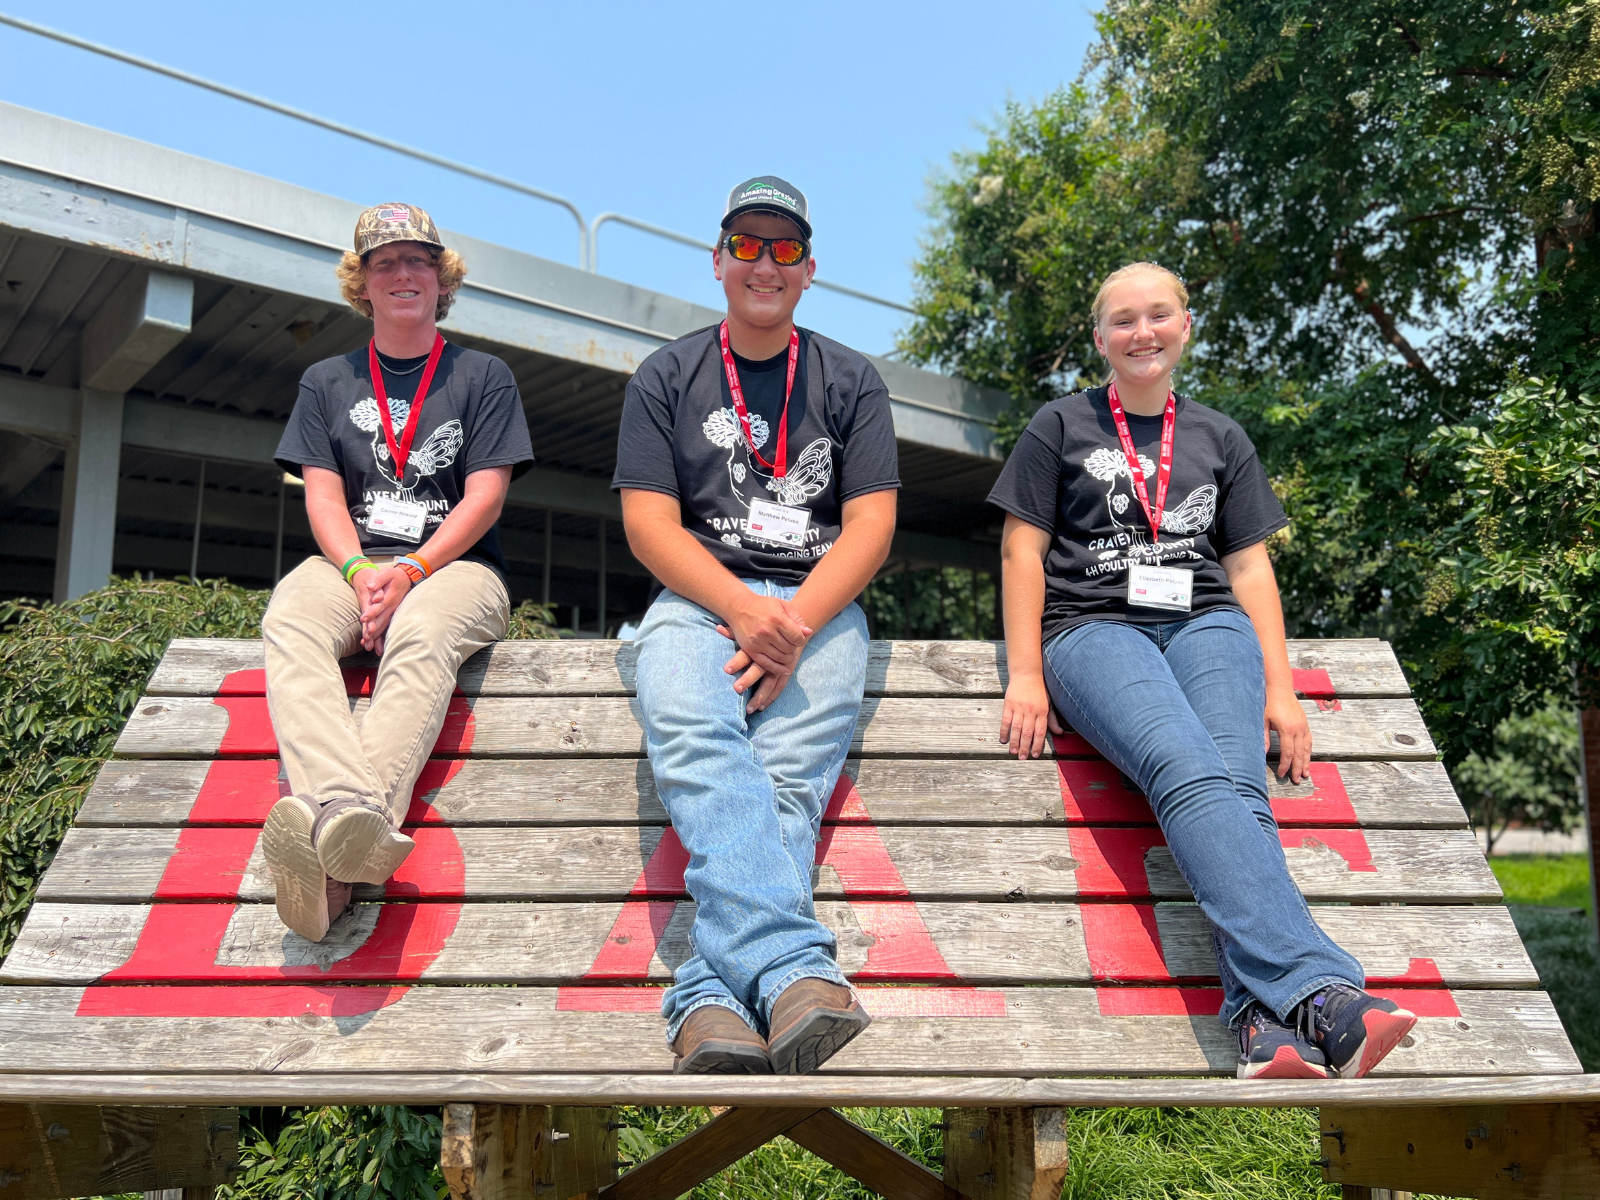 4-Hers at NC State pose for a picture on a tall bench